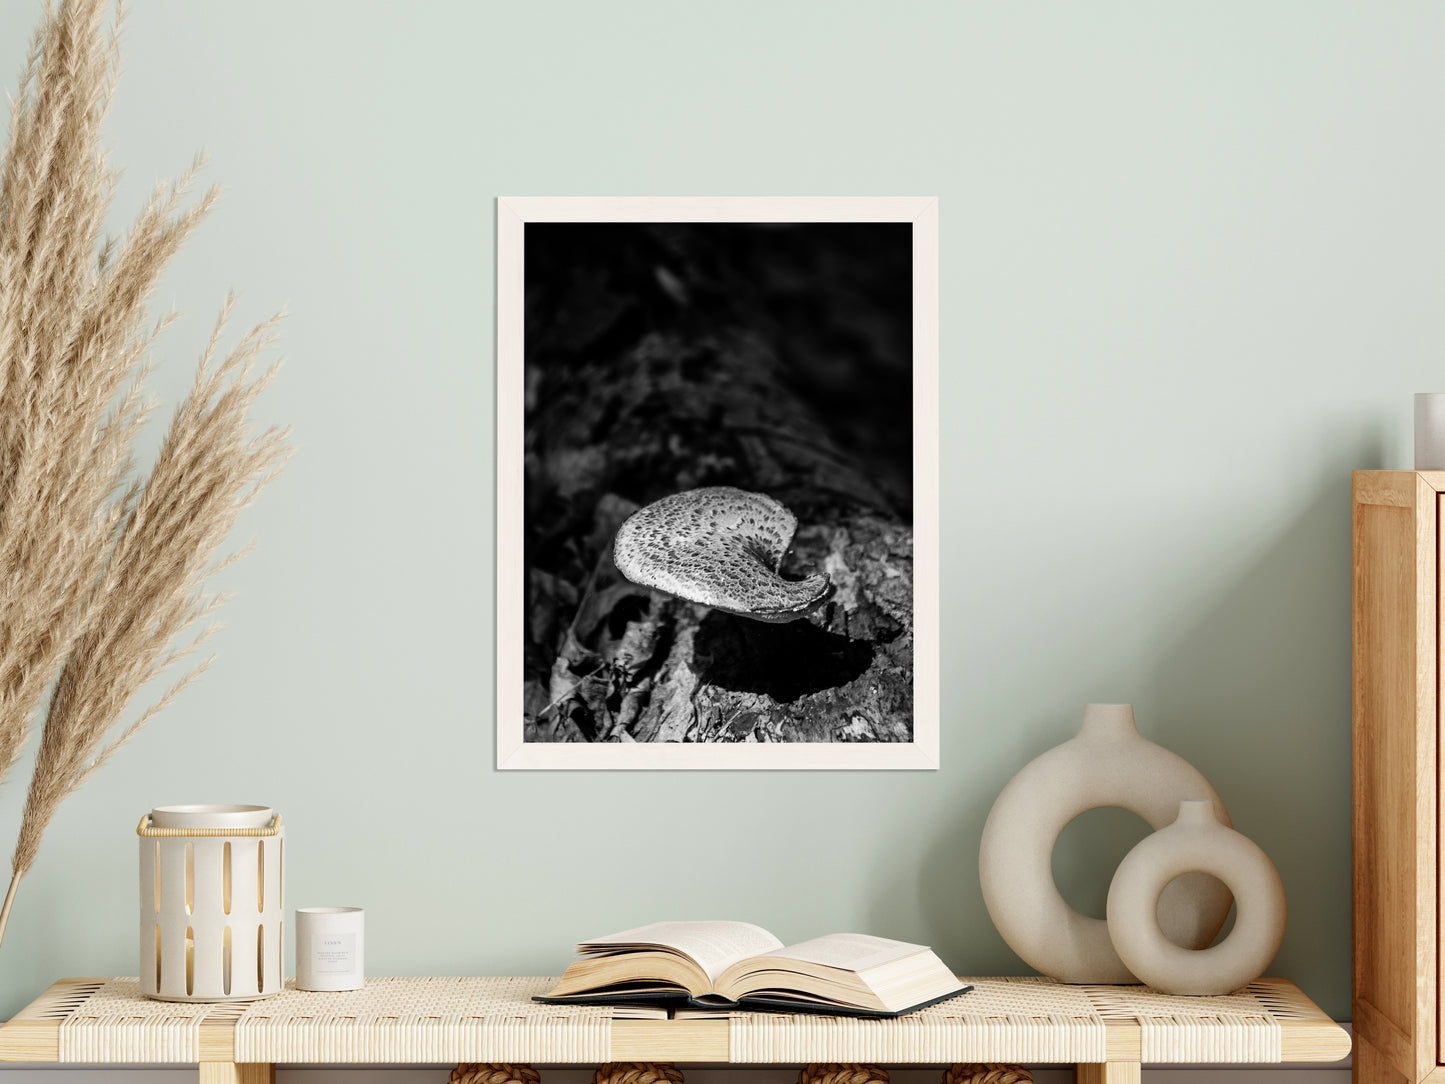 Art Wall Office: Mushroom on Log in Black & White Rustic / Country Style Nature Photo Framed Wall Art Print